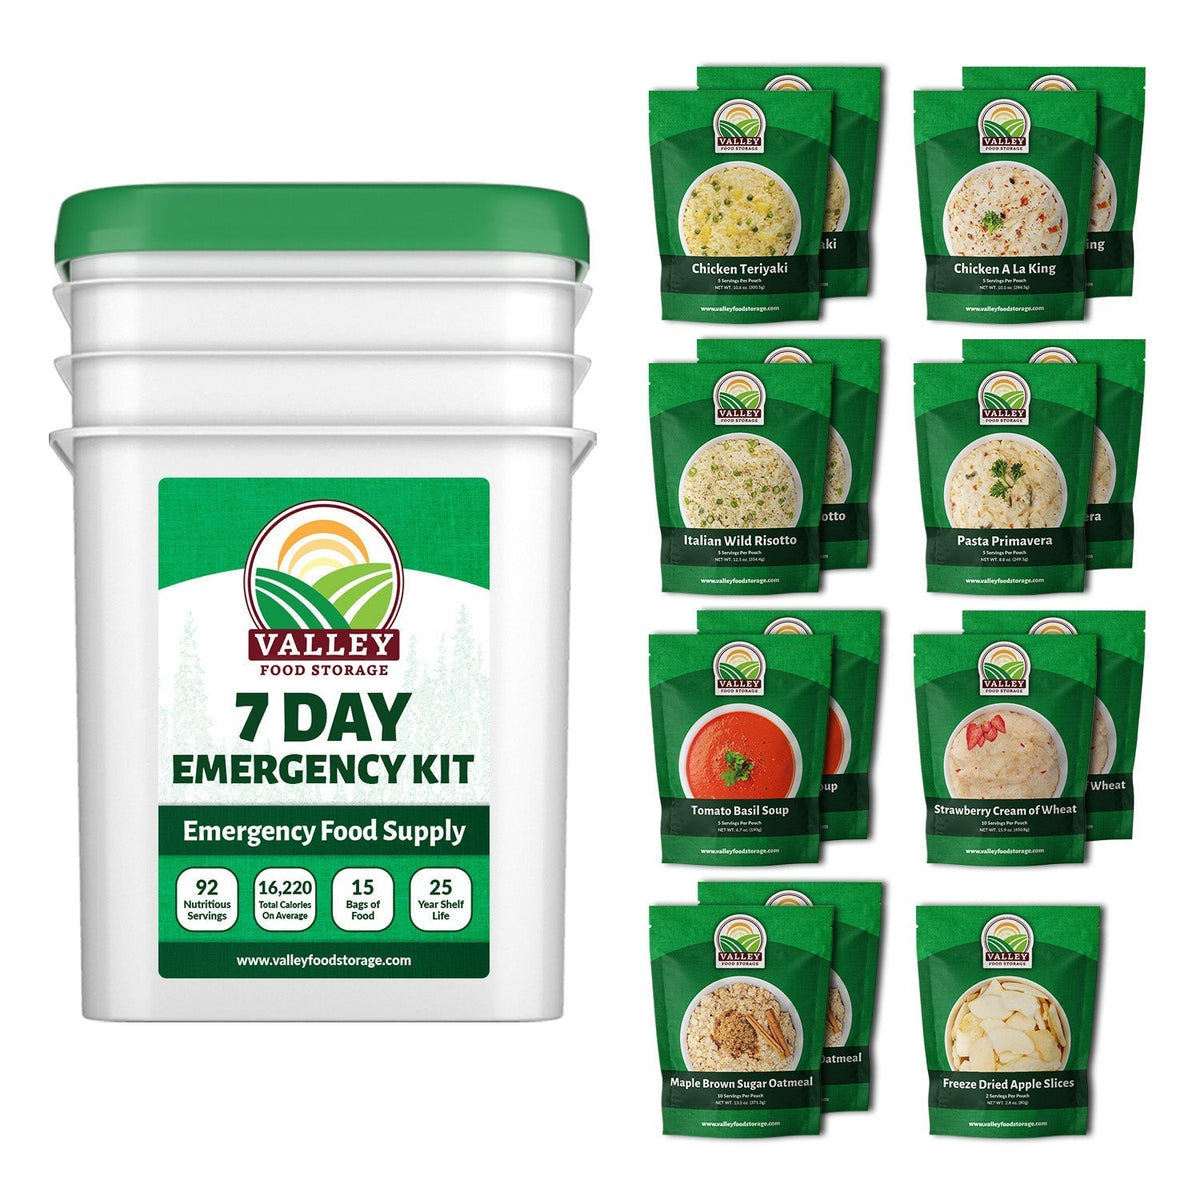 7-Day Emergency Food Kit From Valley Food Storage